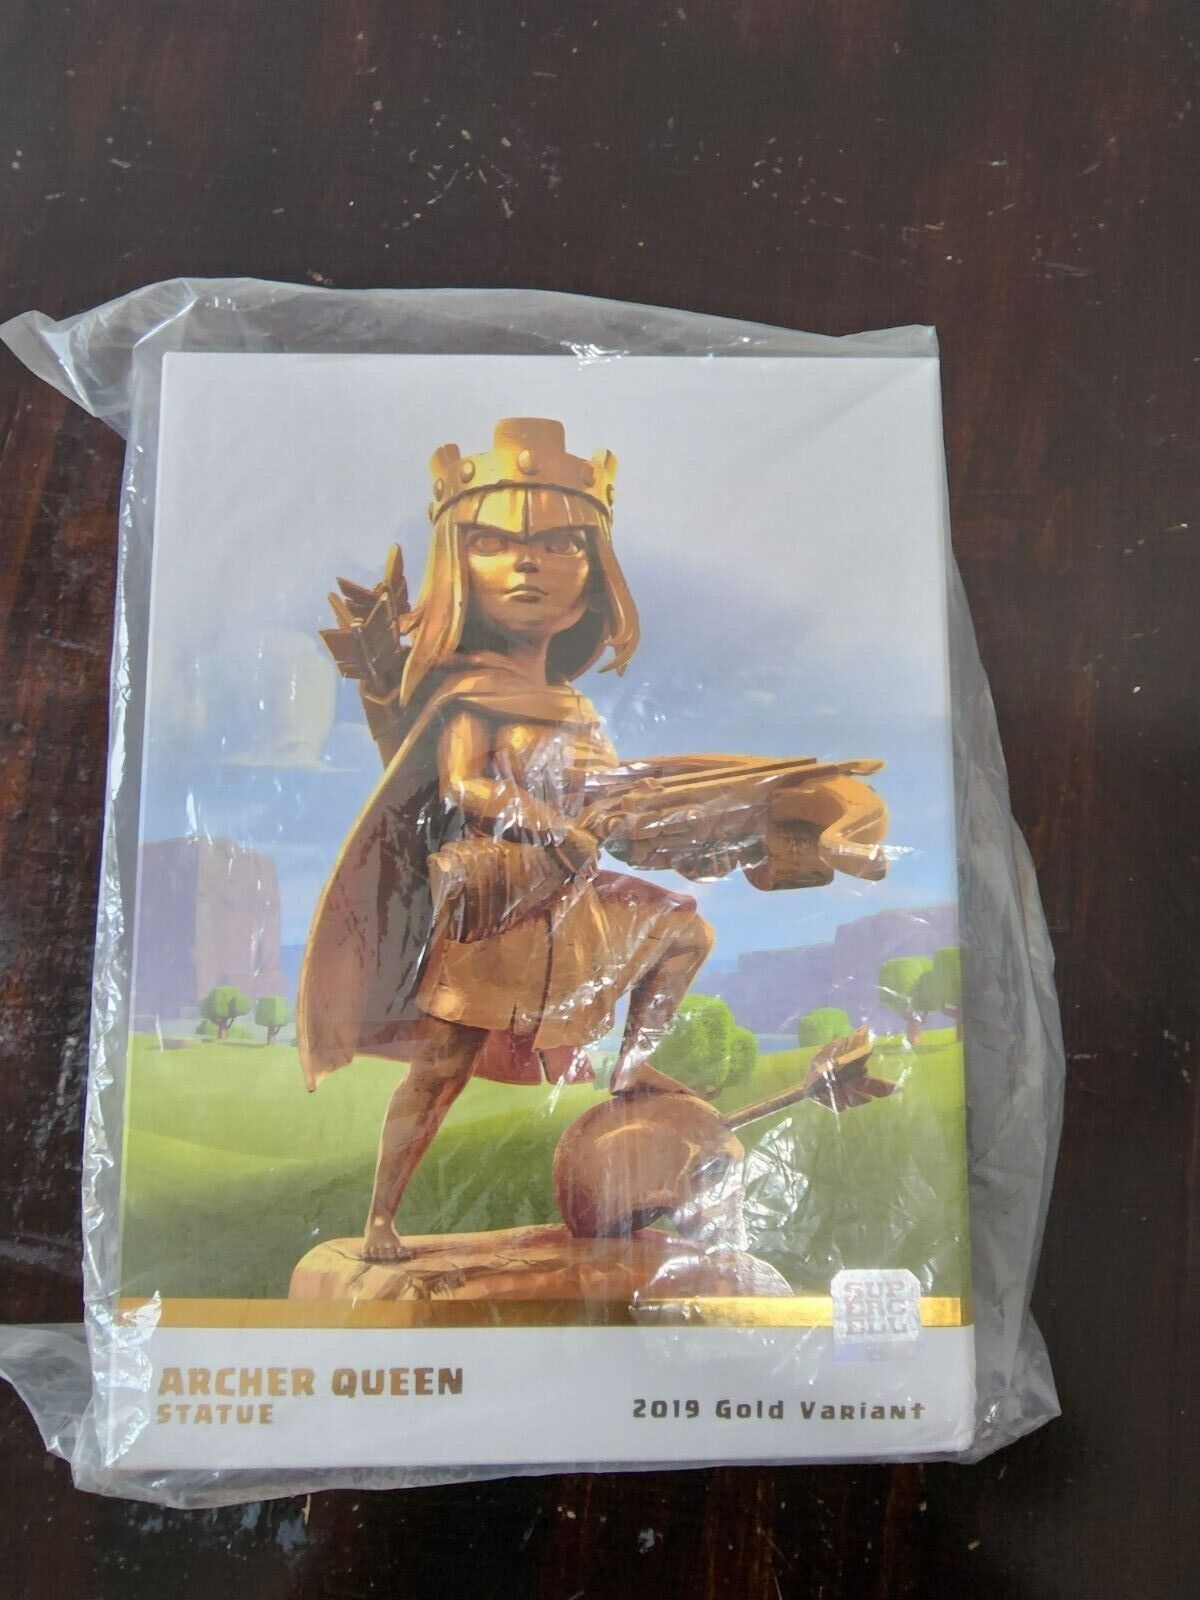 SUPERCELL Clash of Clans Archer Queen 2019 Gold Statue - Limited Edition